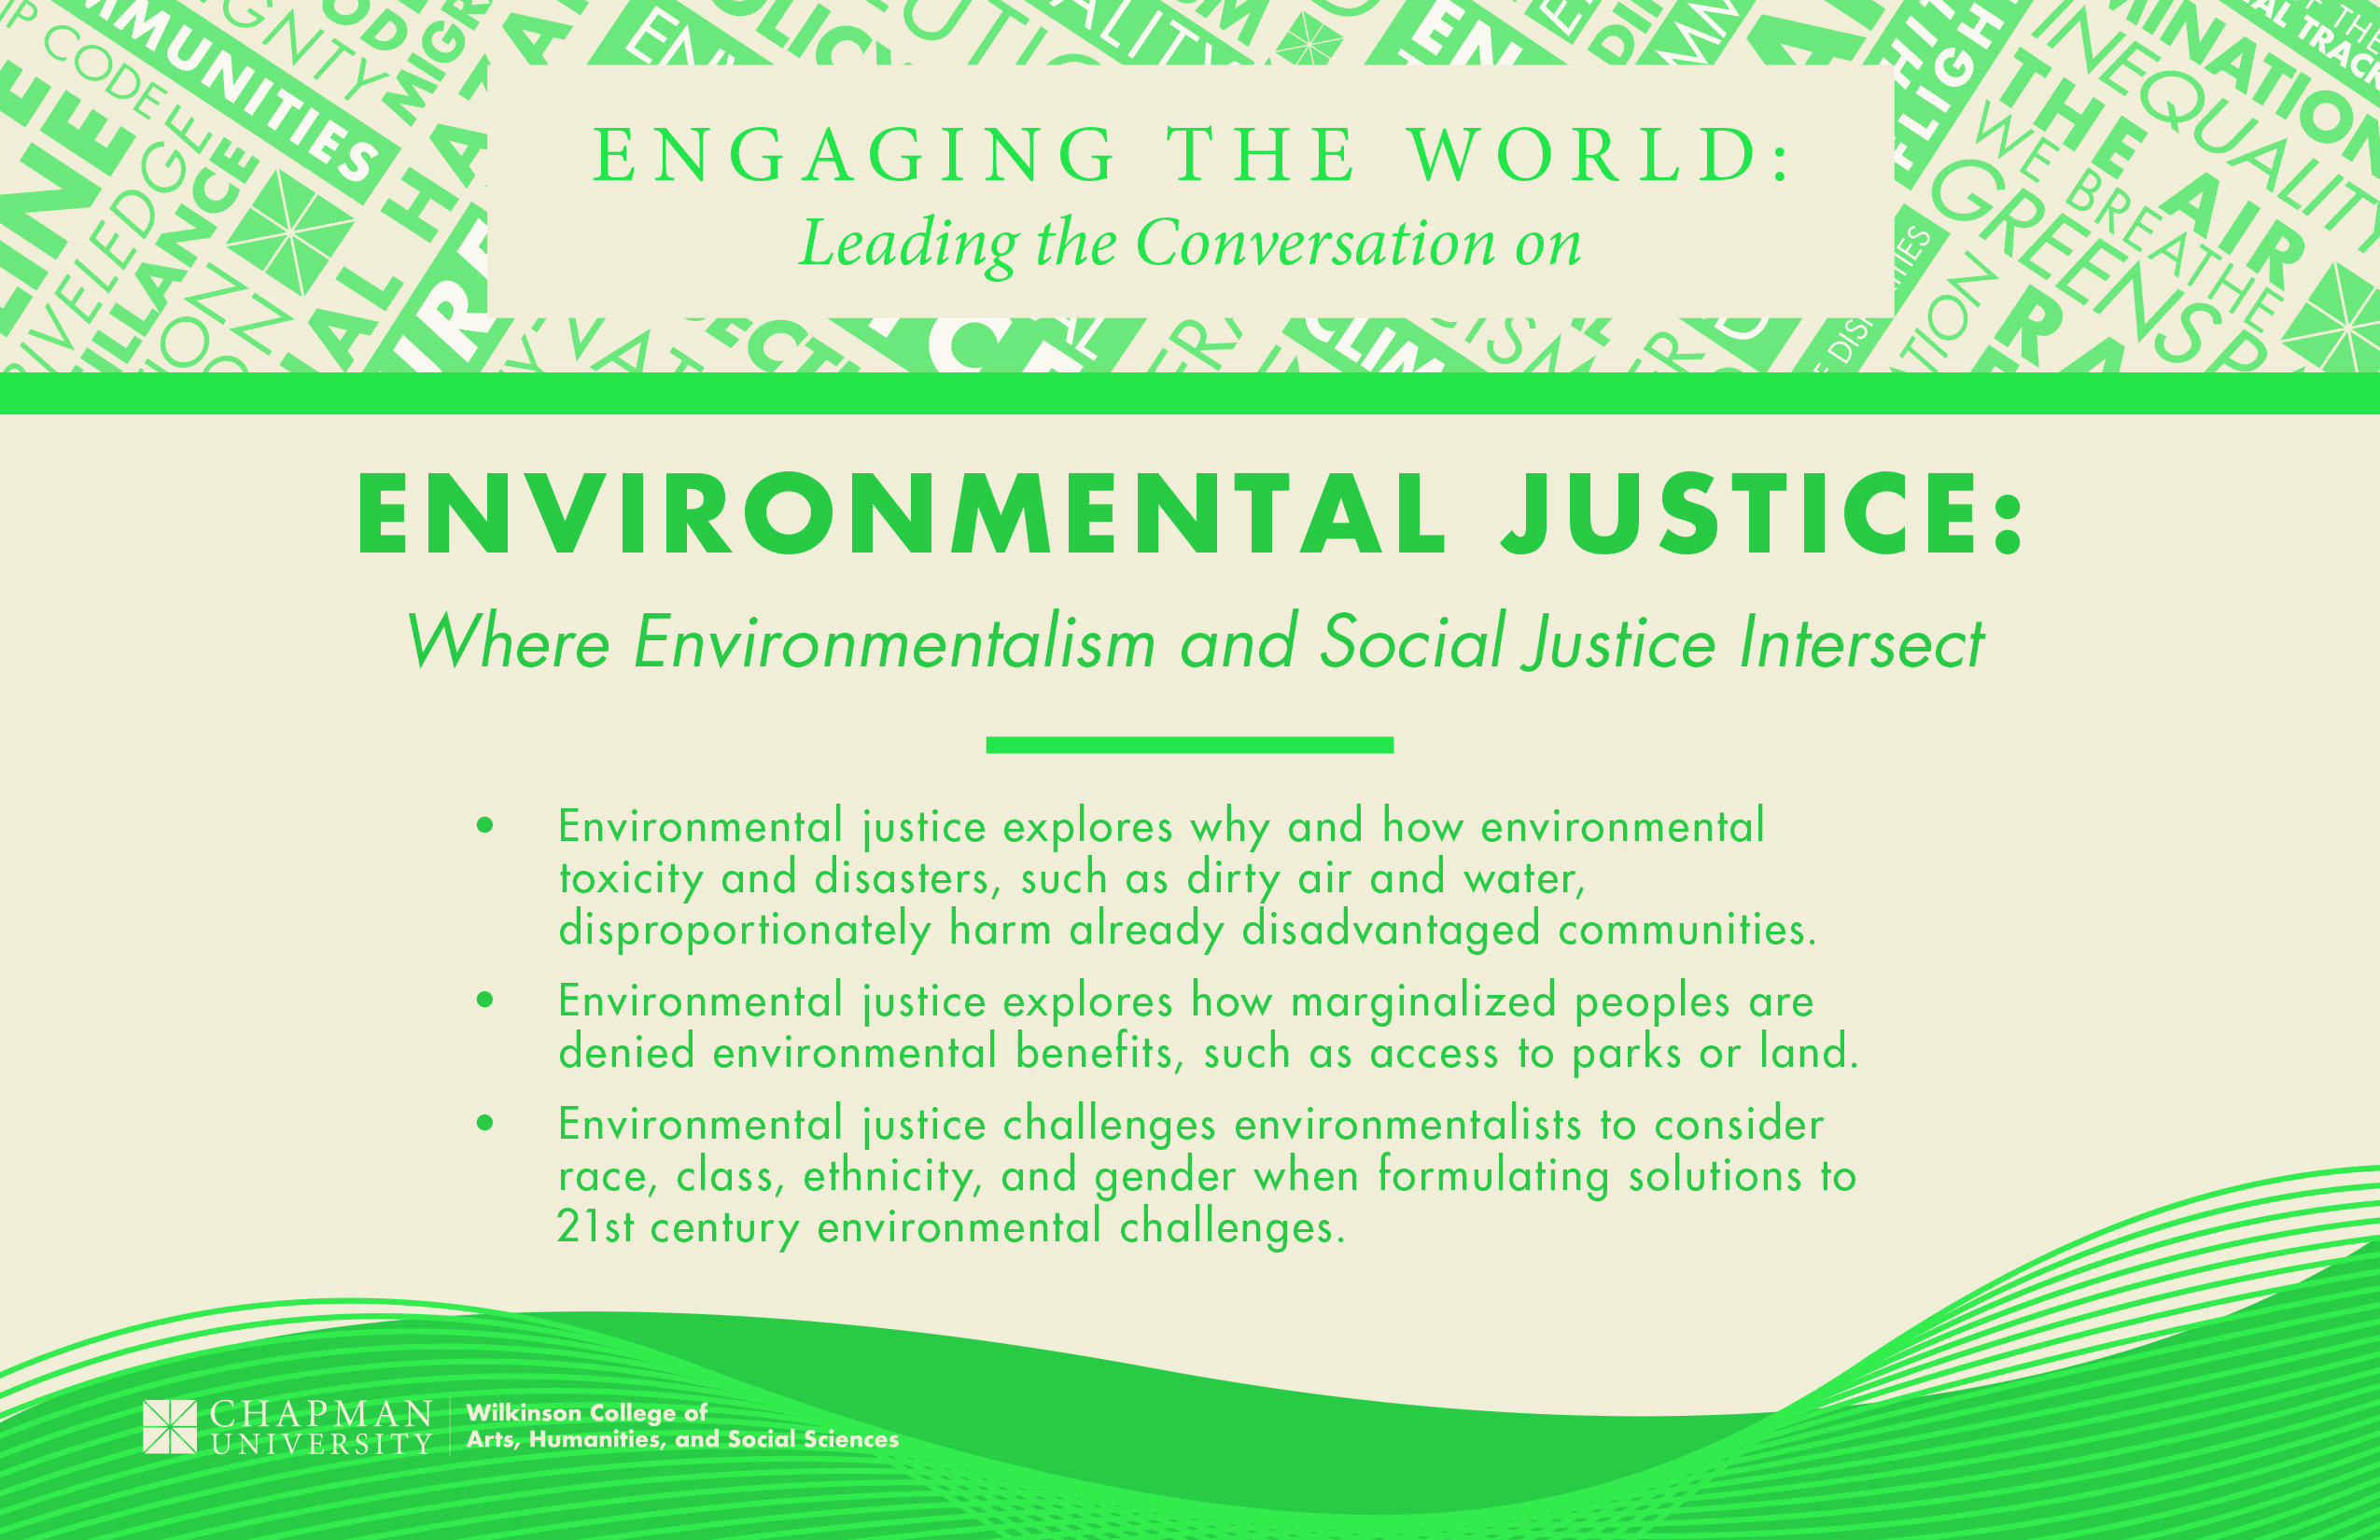 Engaging the World: Leading the Conversation on Environmental Justice